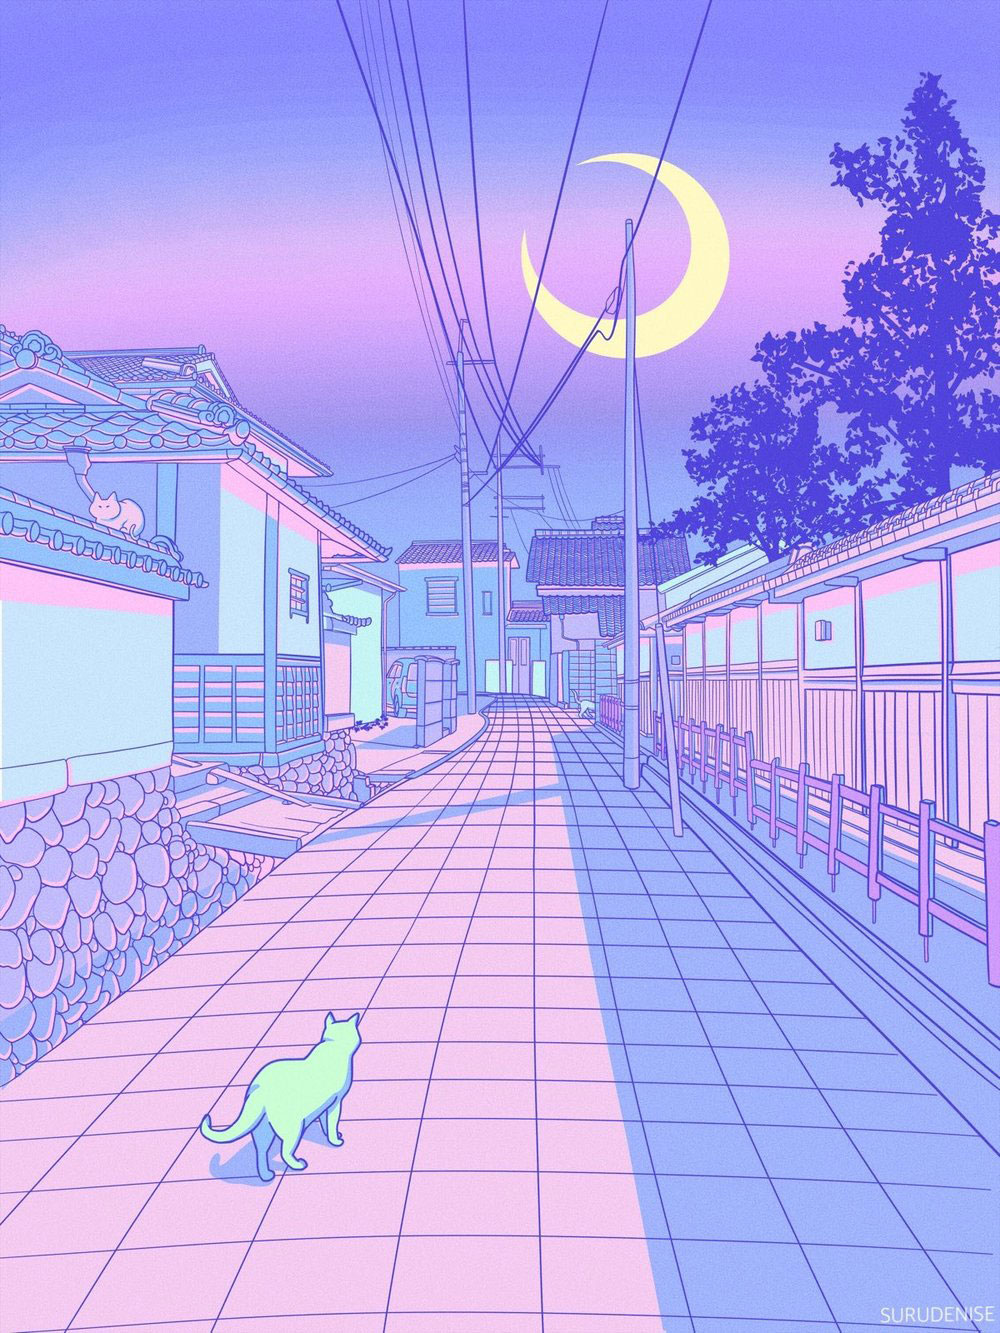 Pastel Japan, Cats and Alleyways Illustrations. Pastel aesthetic